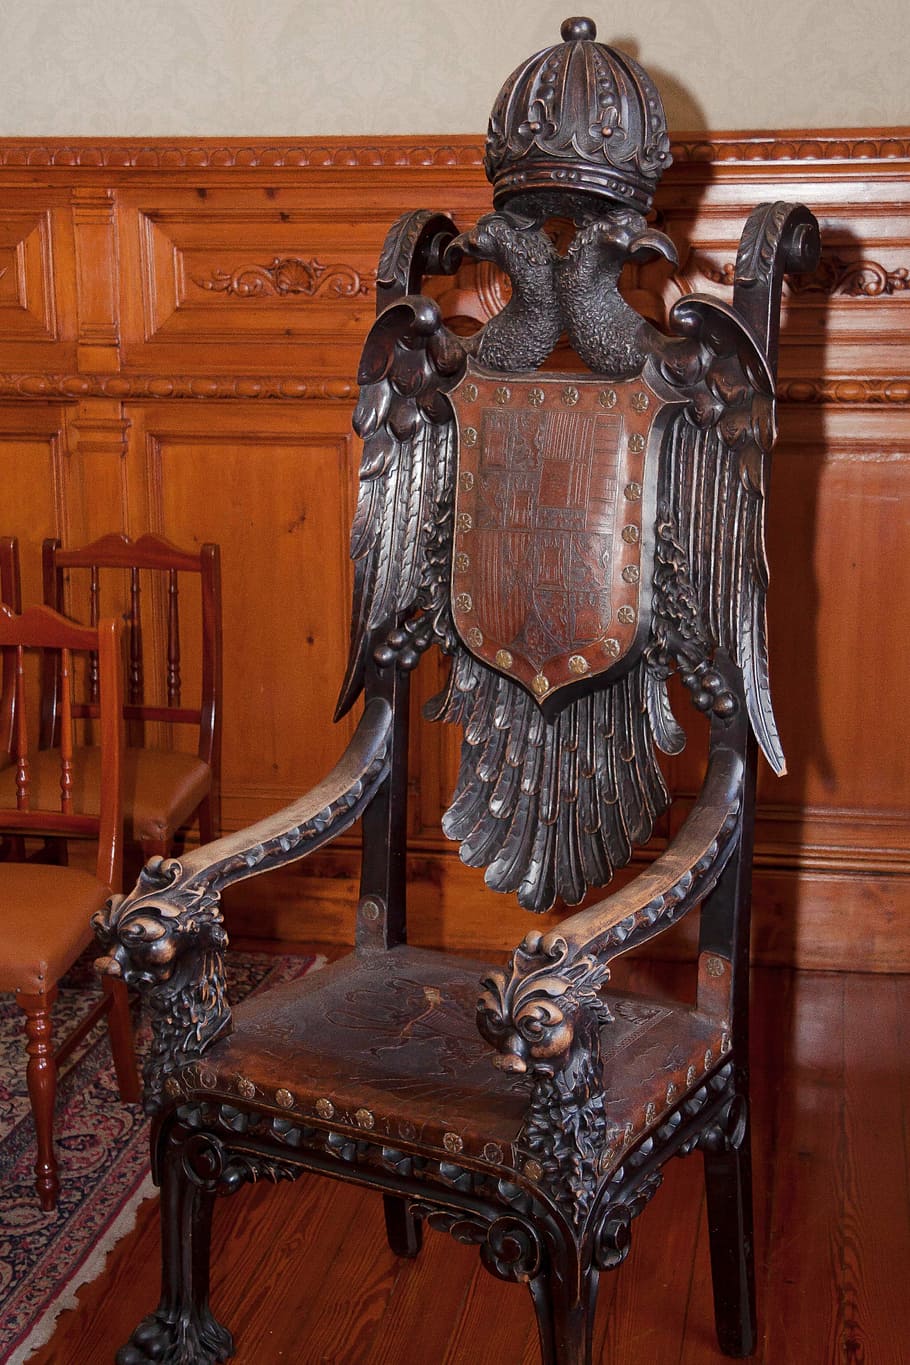 throne, wood, carved, turned, rest, leather, coat of arms, rivet, crown, doppelkopf